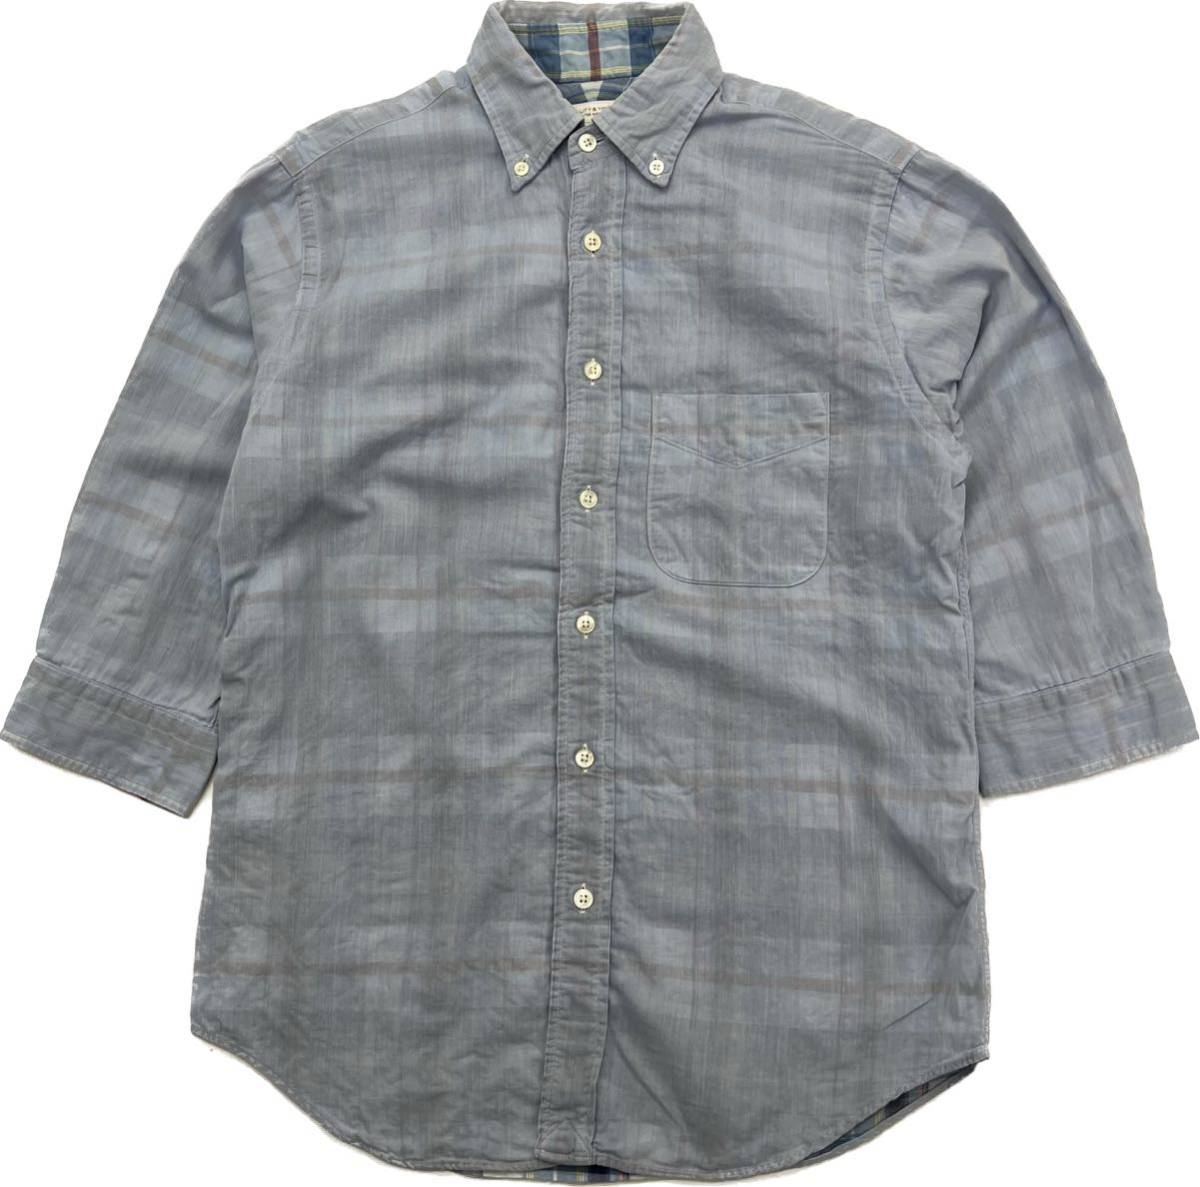 BEAUTY&YOUTH UNITED ARROWS * spring summer 7 minute sleeve check button down shirt light blue XS adult casual United Arrows #S2325